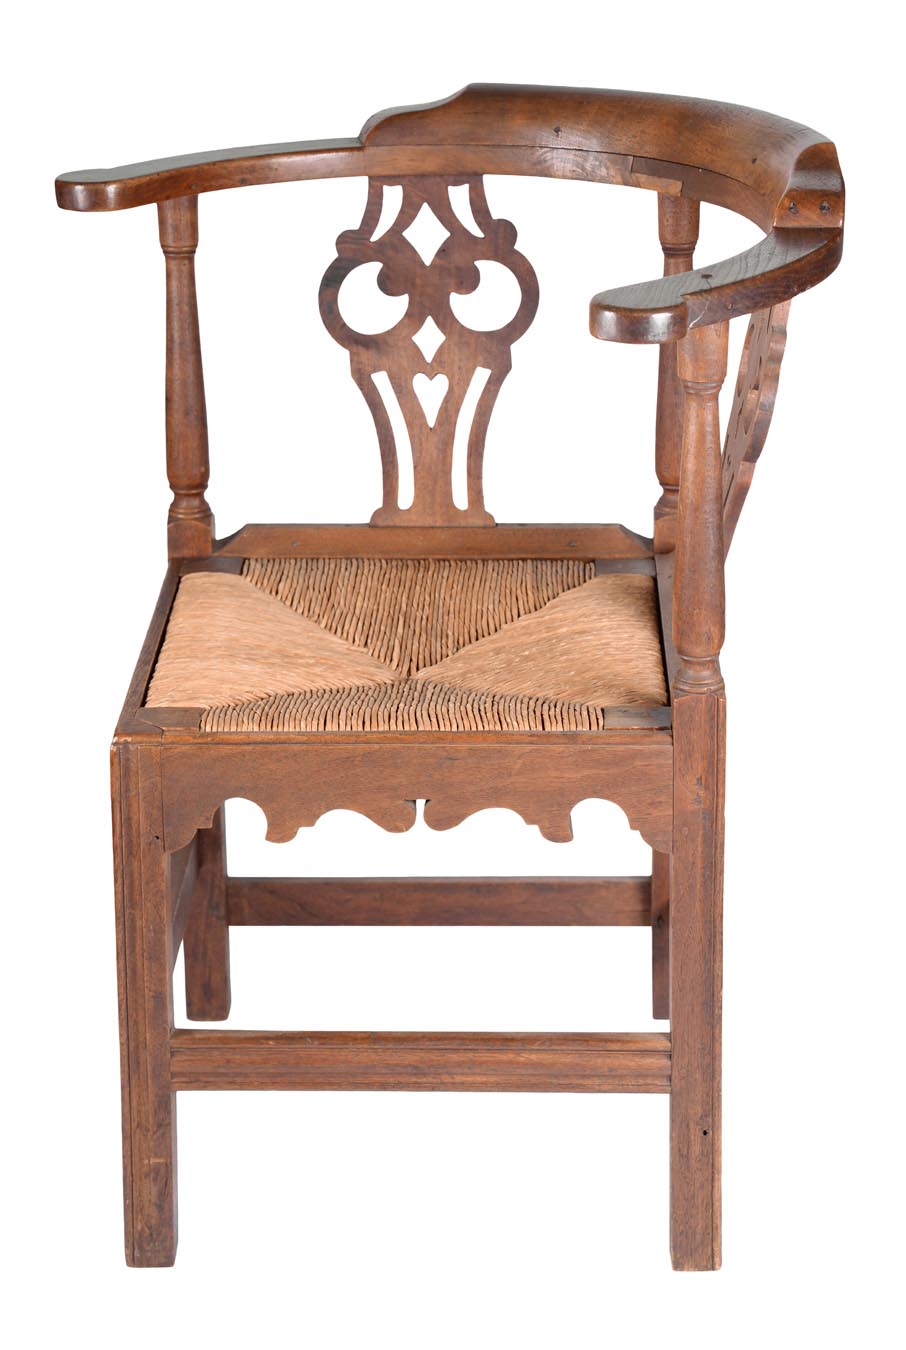 New Hampshire Chippendale corner chair